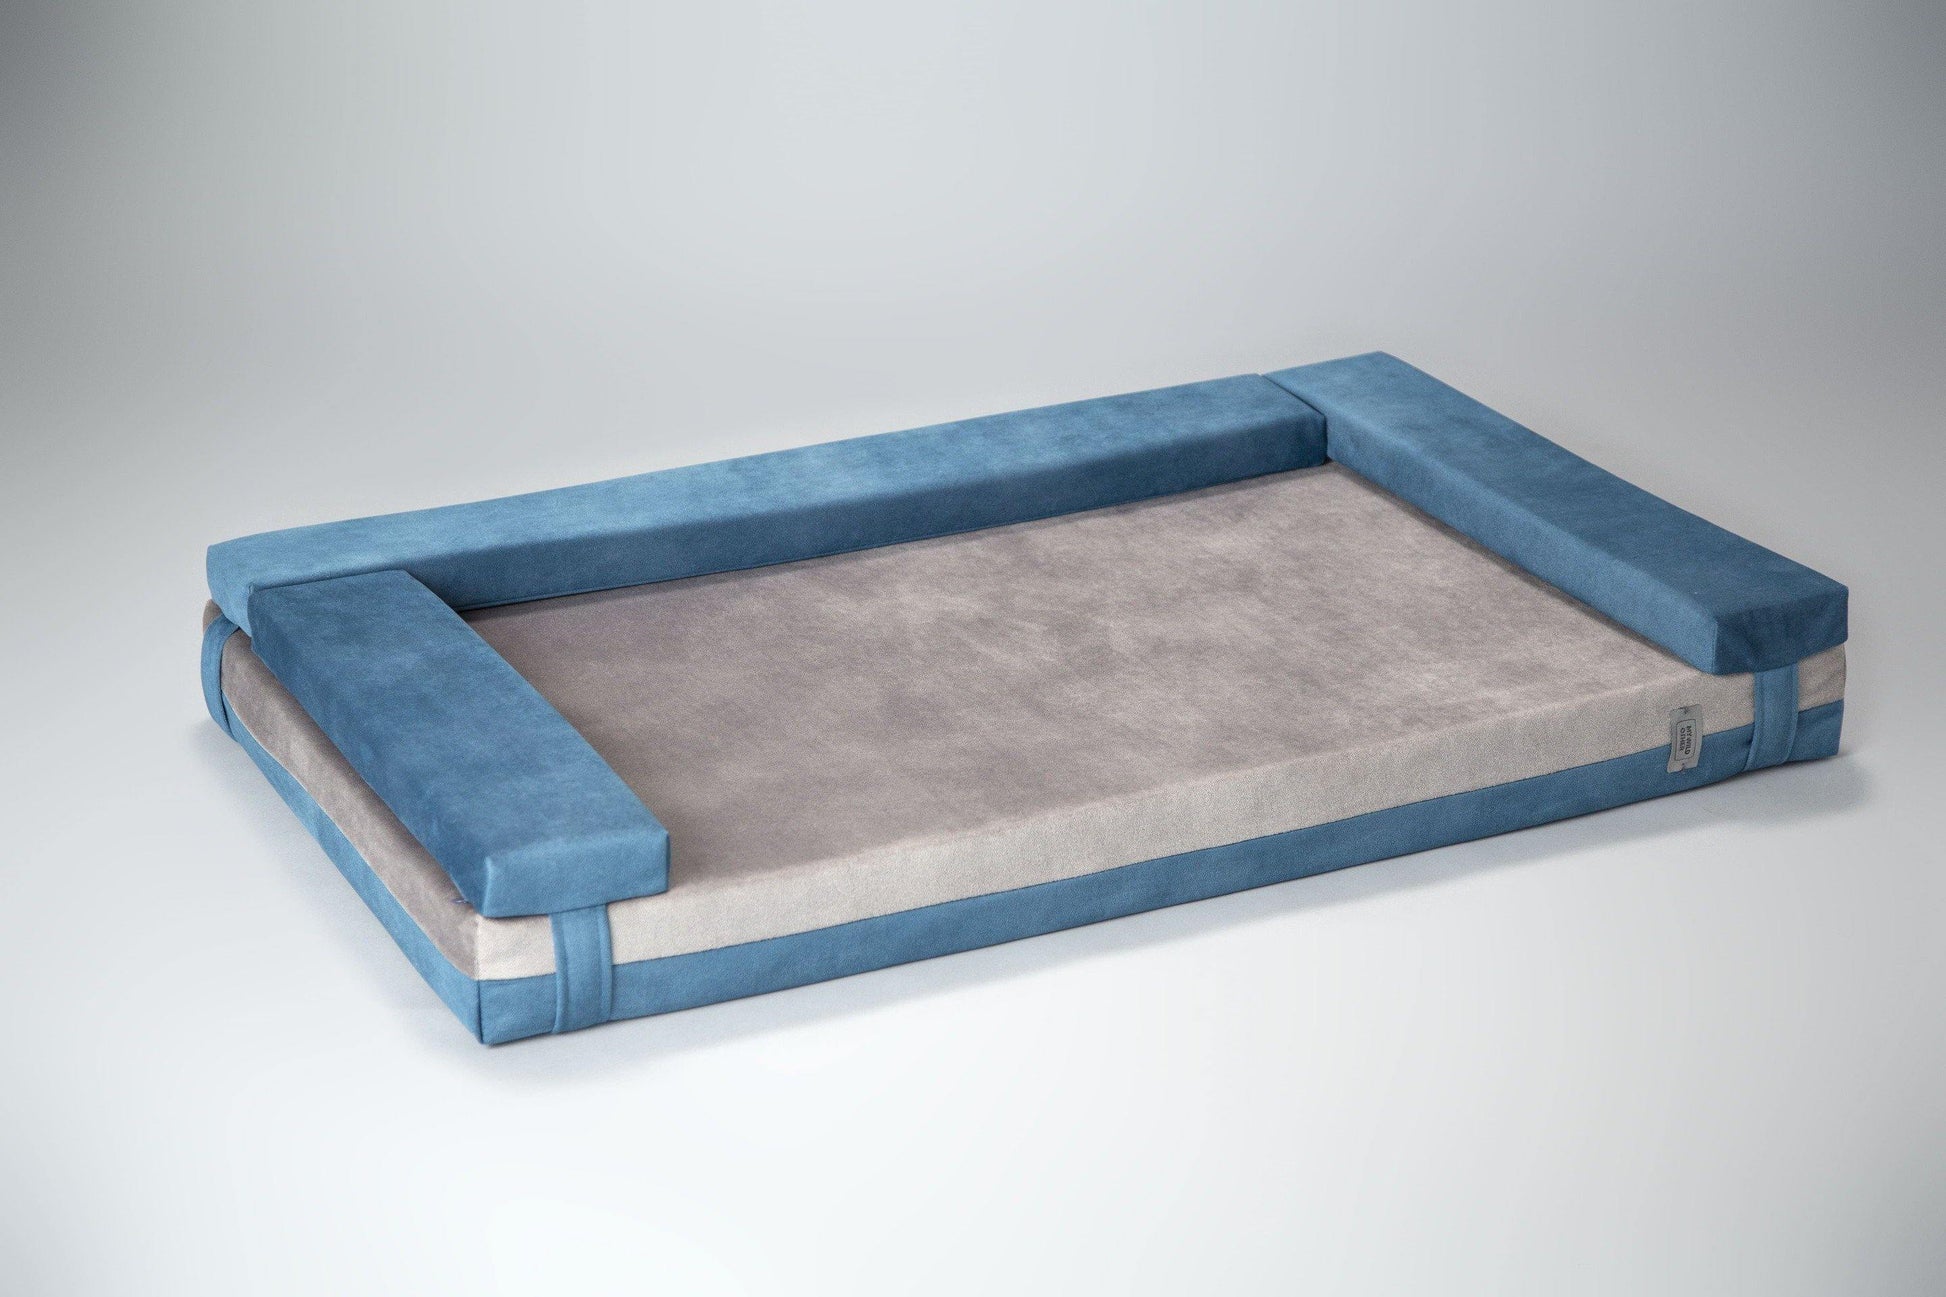 Transformer dog bed | Extra comfort & support | 2-sided | SAPPHIRE BLUE+FOG GREY - premium dog goods handmade in Europe by My Wild Other